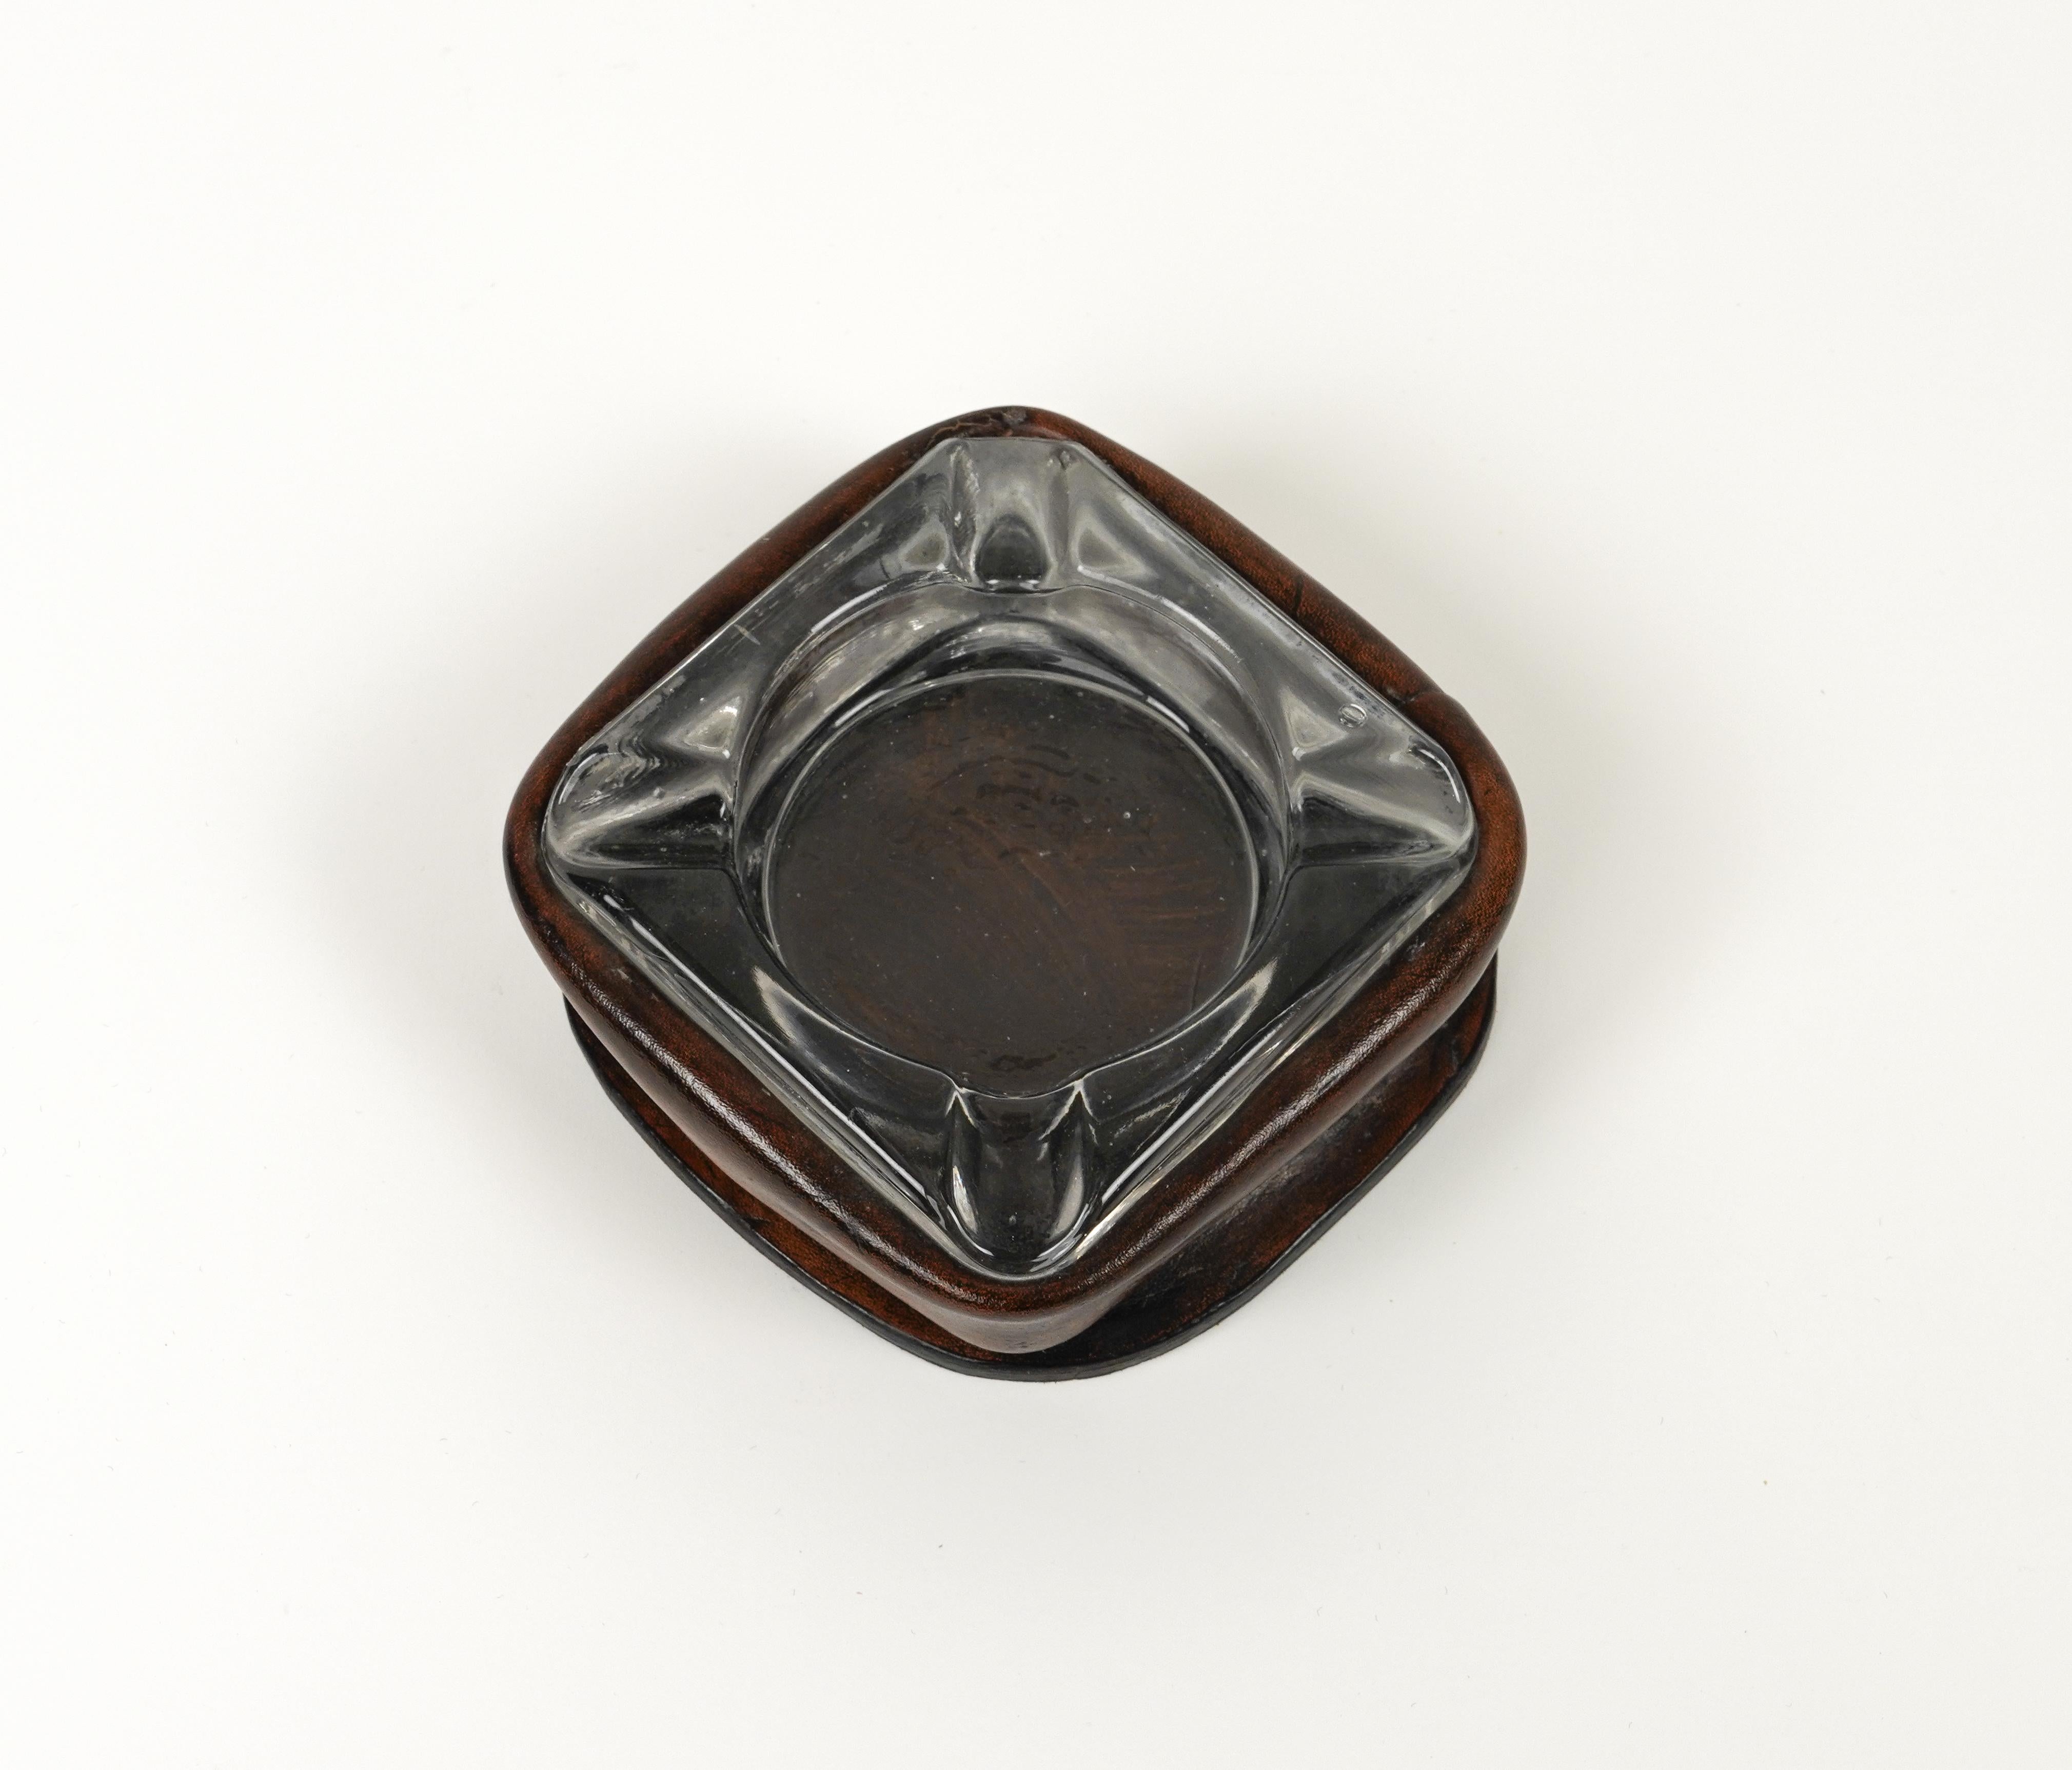 Midcentury Squared Ashtray in Leather and Glass Jacques Adnet Style, Italy 1970s For Sale 6